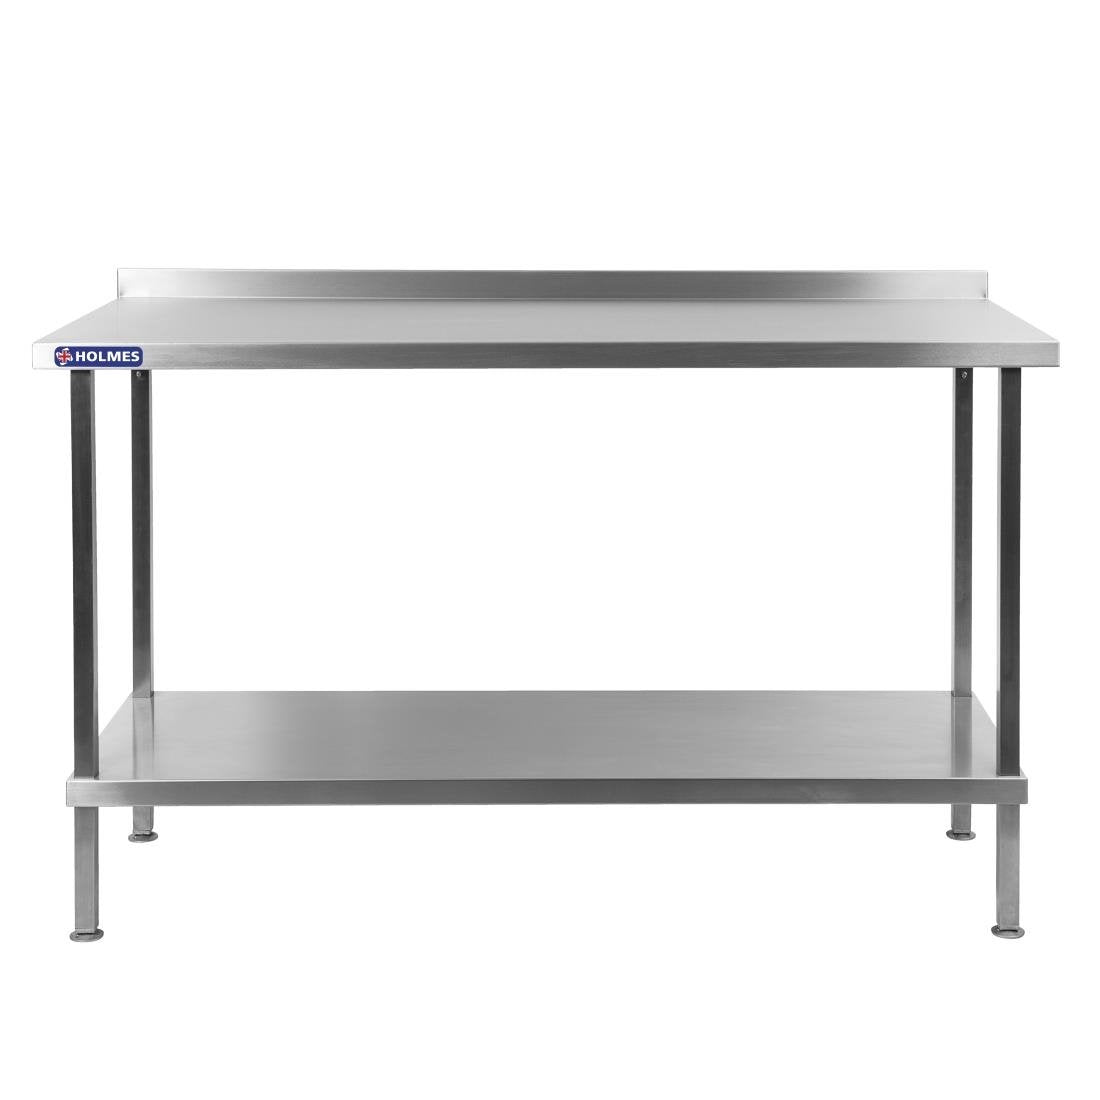 DR031 Holmes Stainless Wall Table with Upstand 1800mm JD Catering Equipment Solutions Ltd